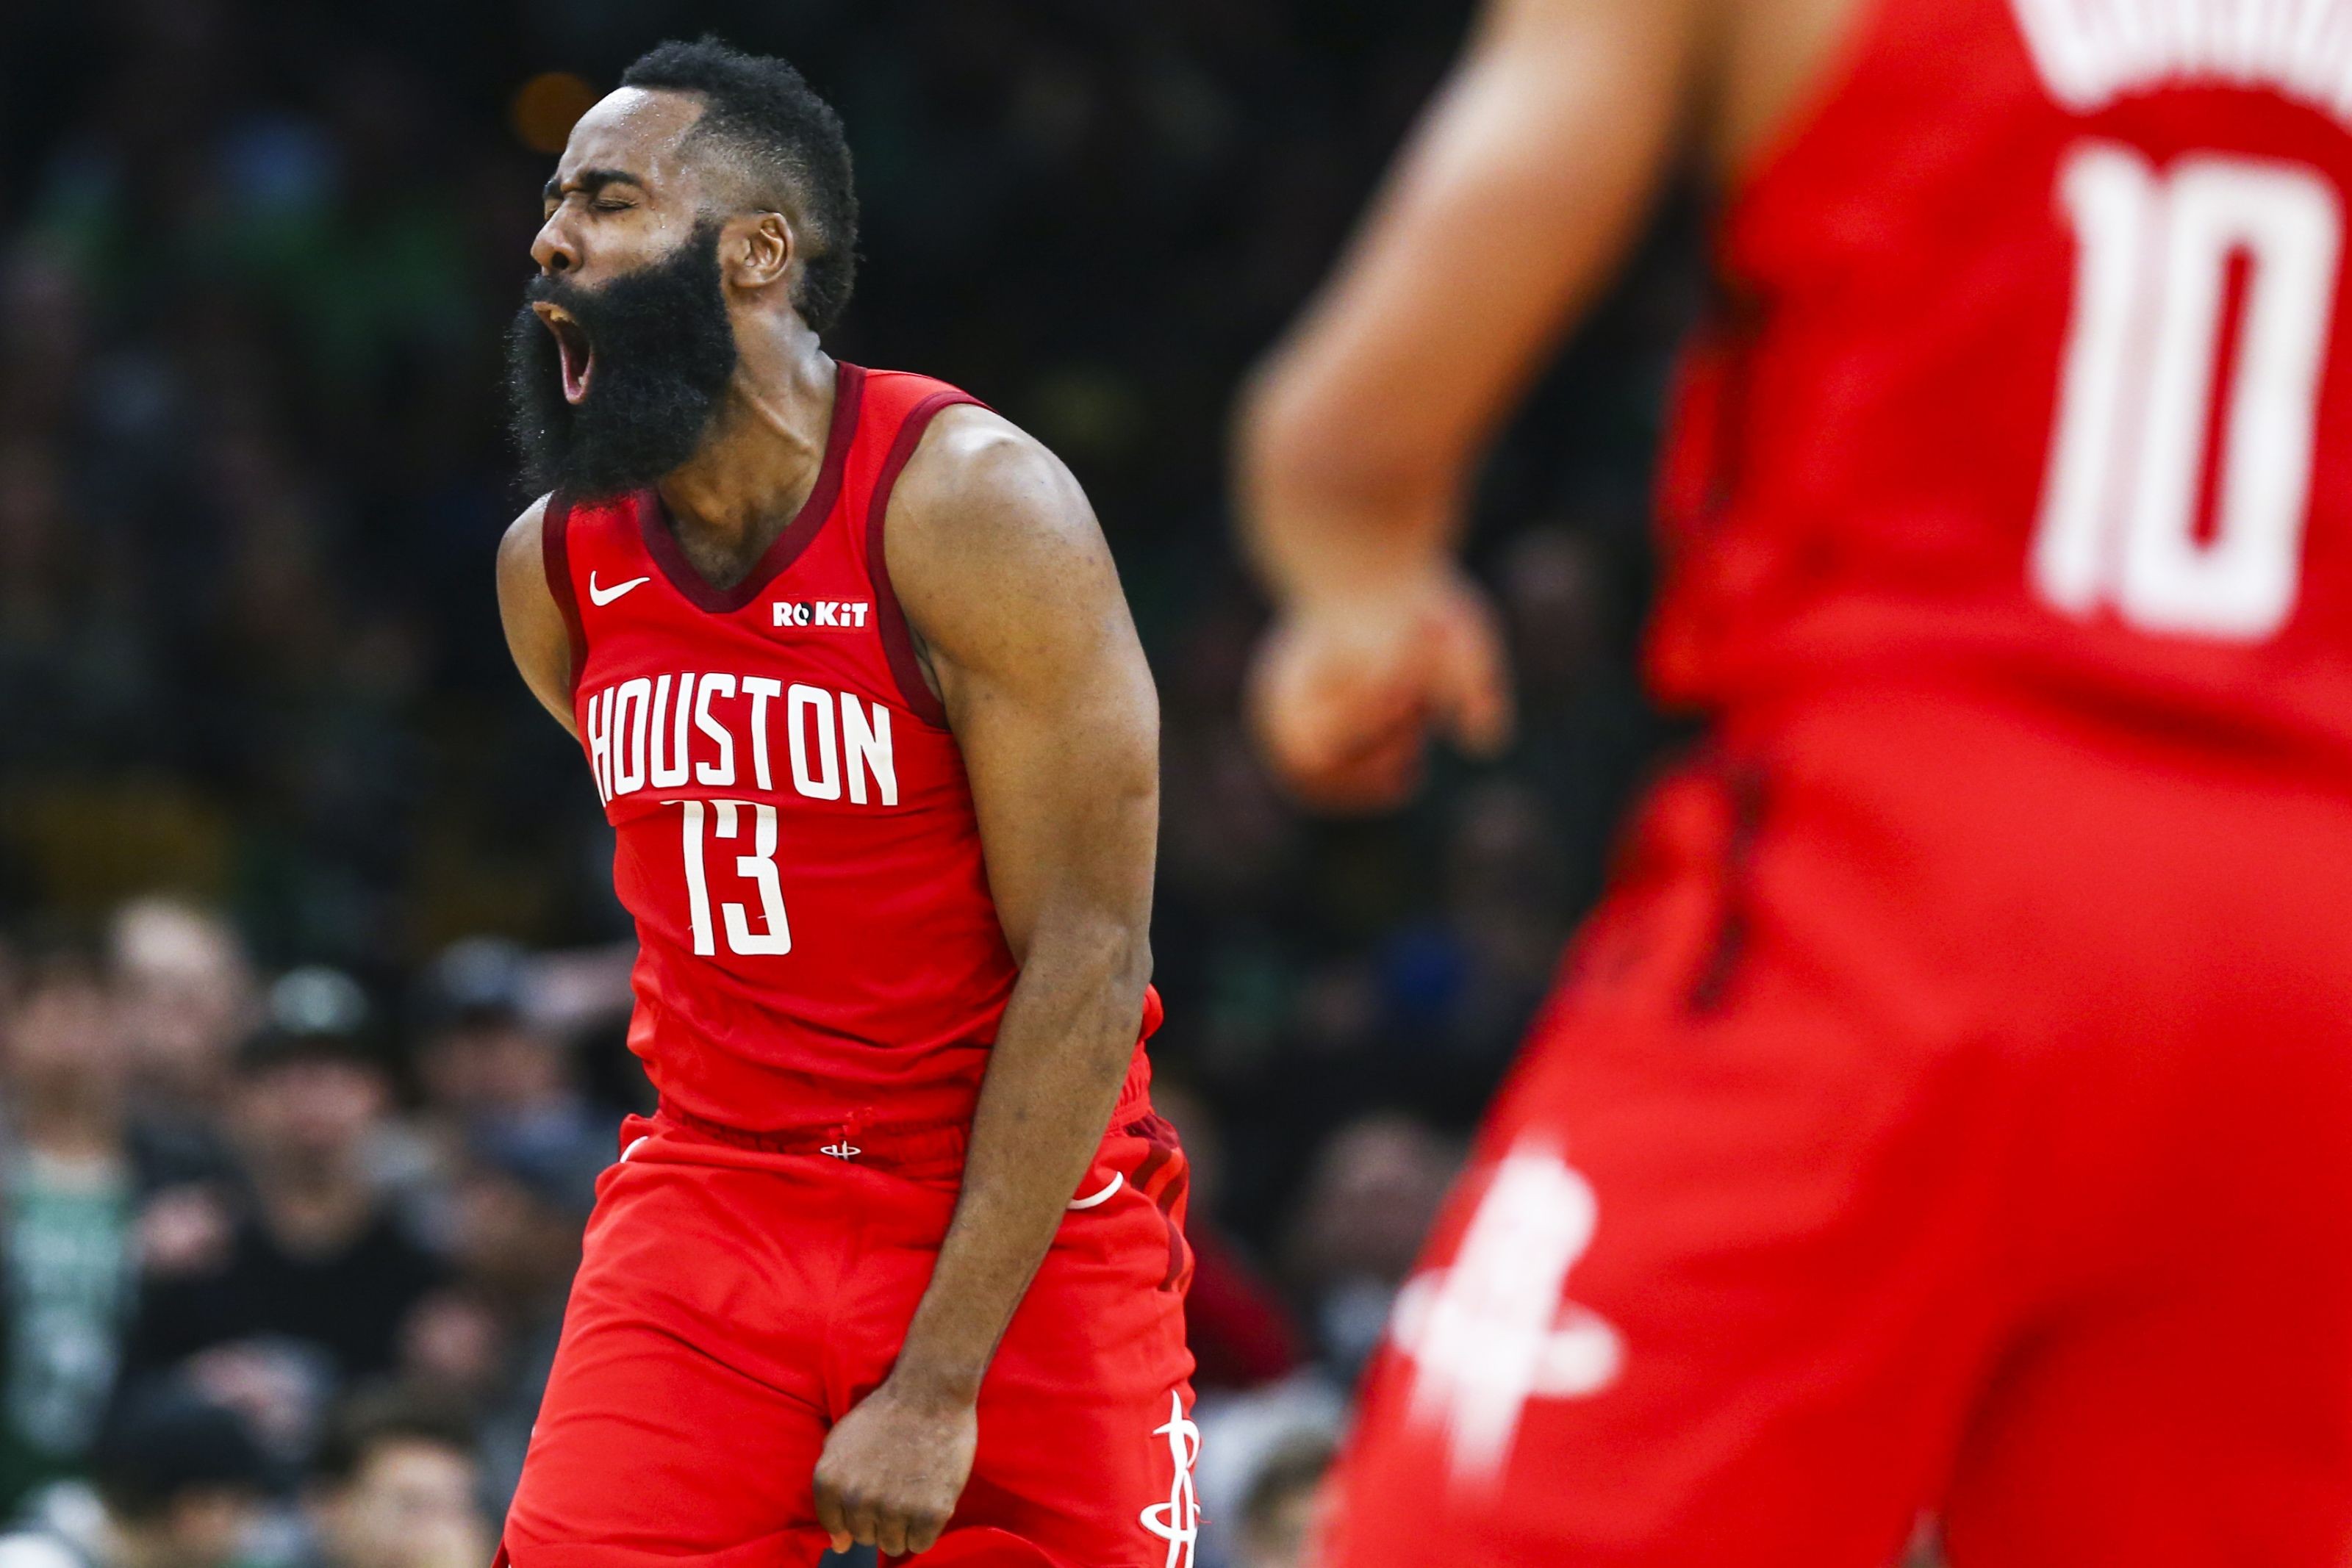 Houston Rockets have huge Sunday afternoon win over the Celtics